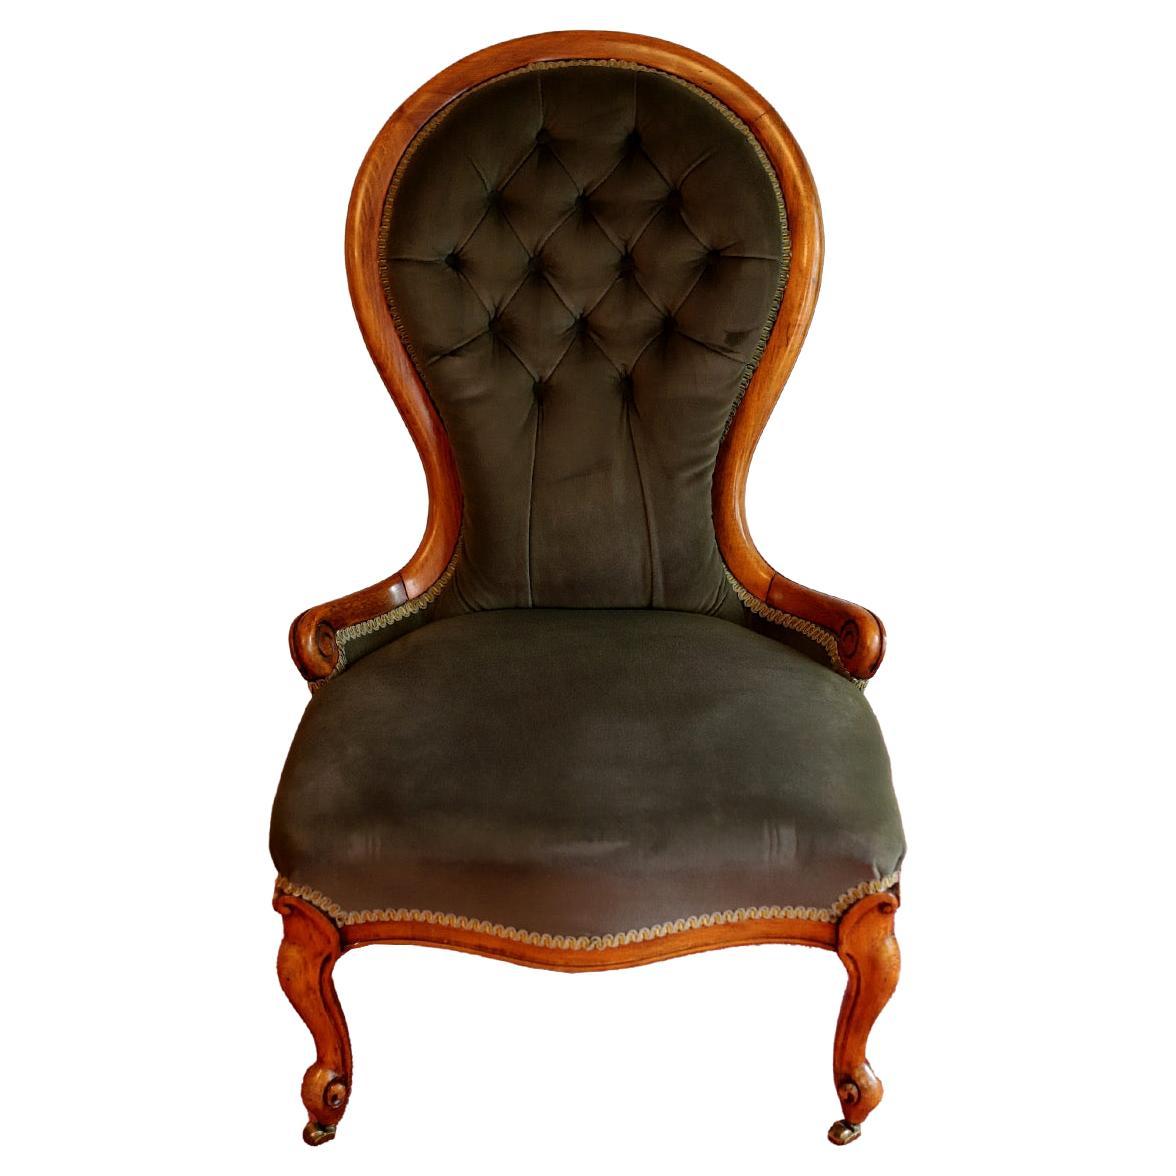 Beautiful Antique Victorian mahogany ladies chair boasting a lovely shaped back, serpentine front rail, standing on shaped cabriole legs to the front out swept back legs in original upholstery, circa 1870
Don't hesitate to contact me if you have any